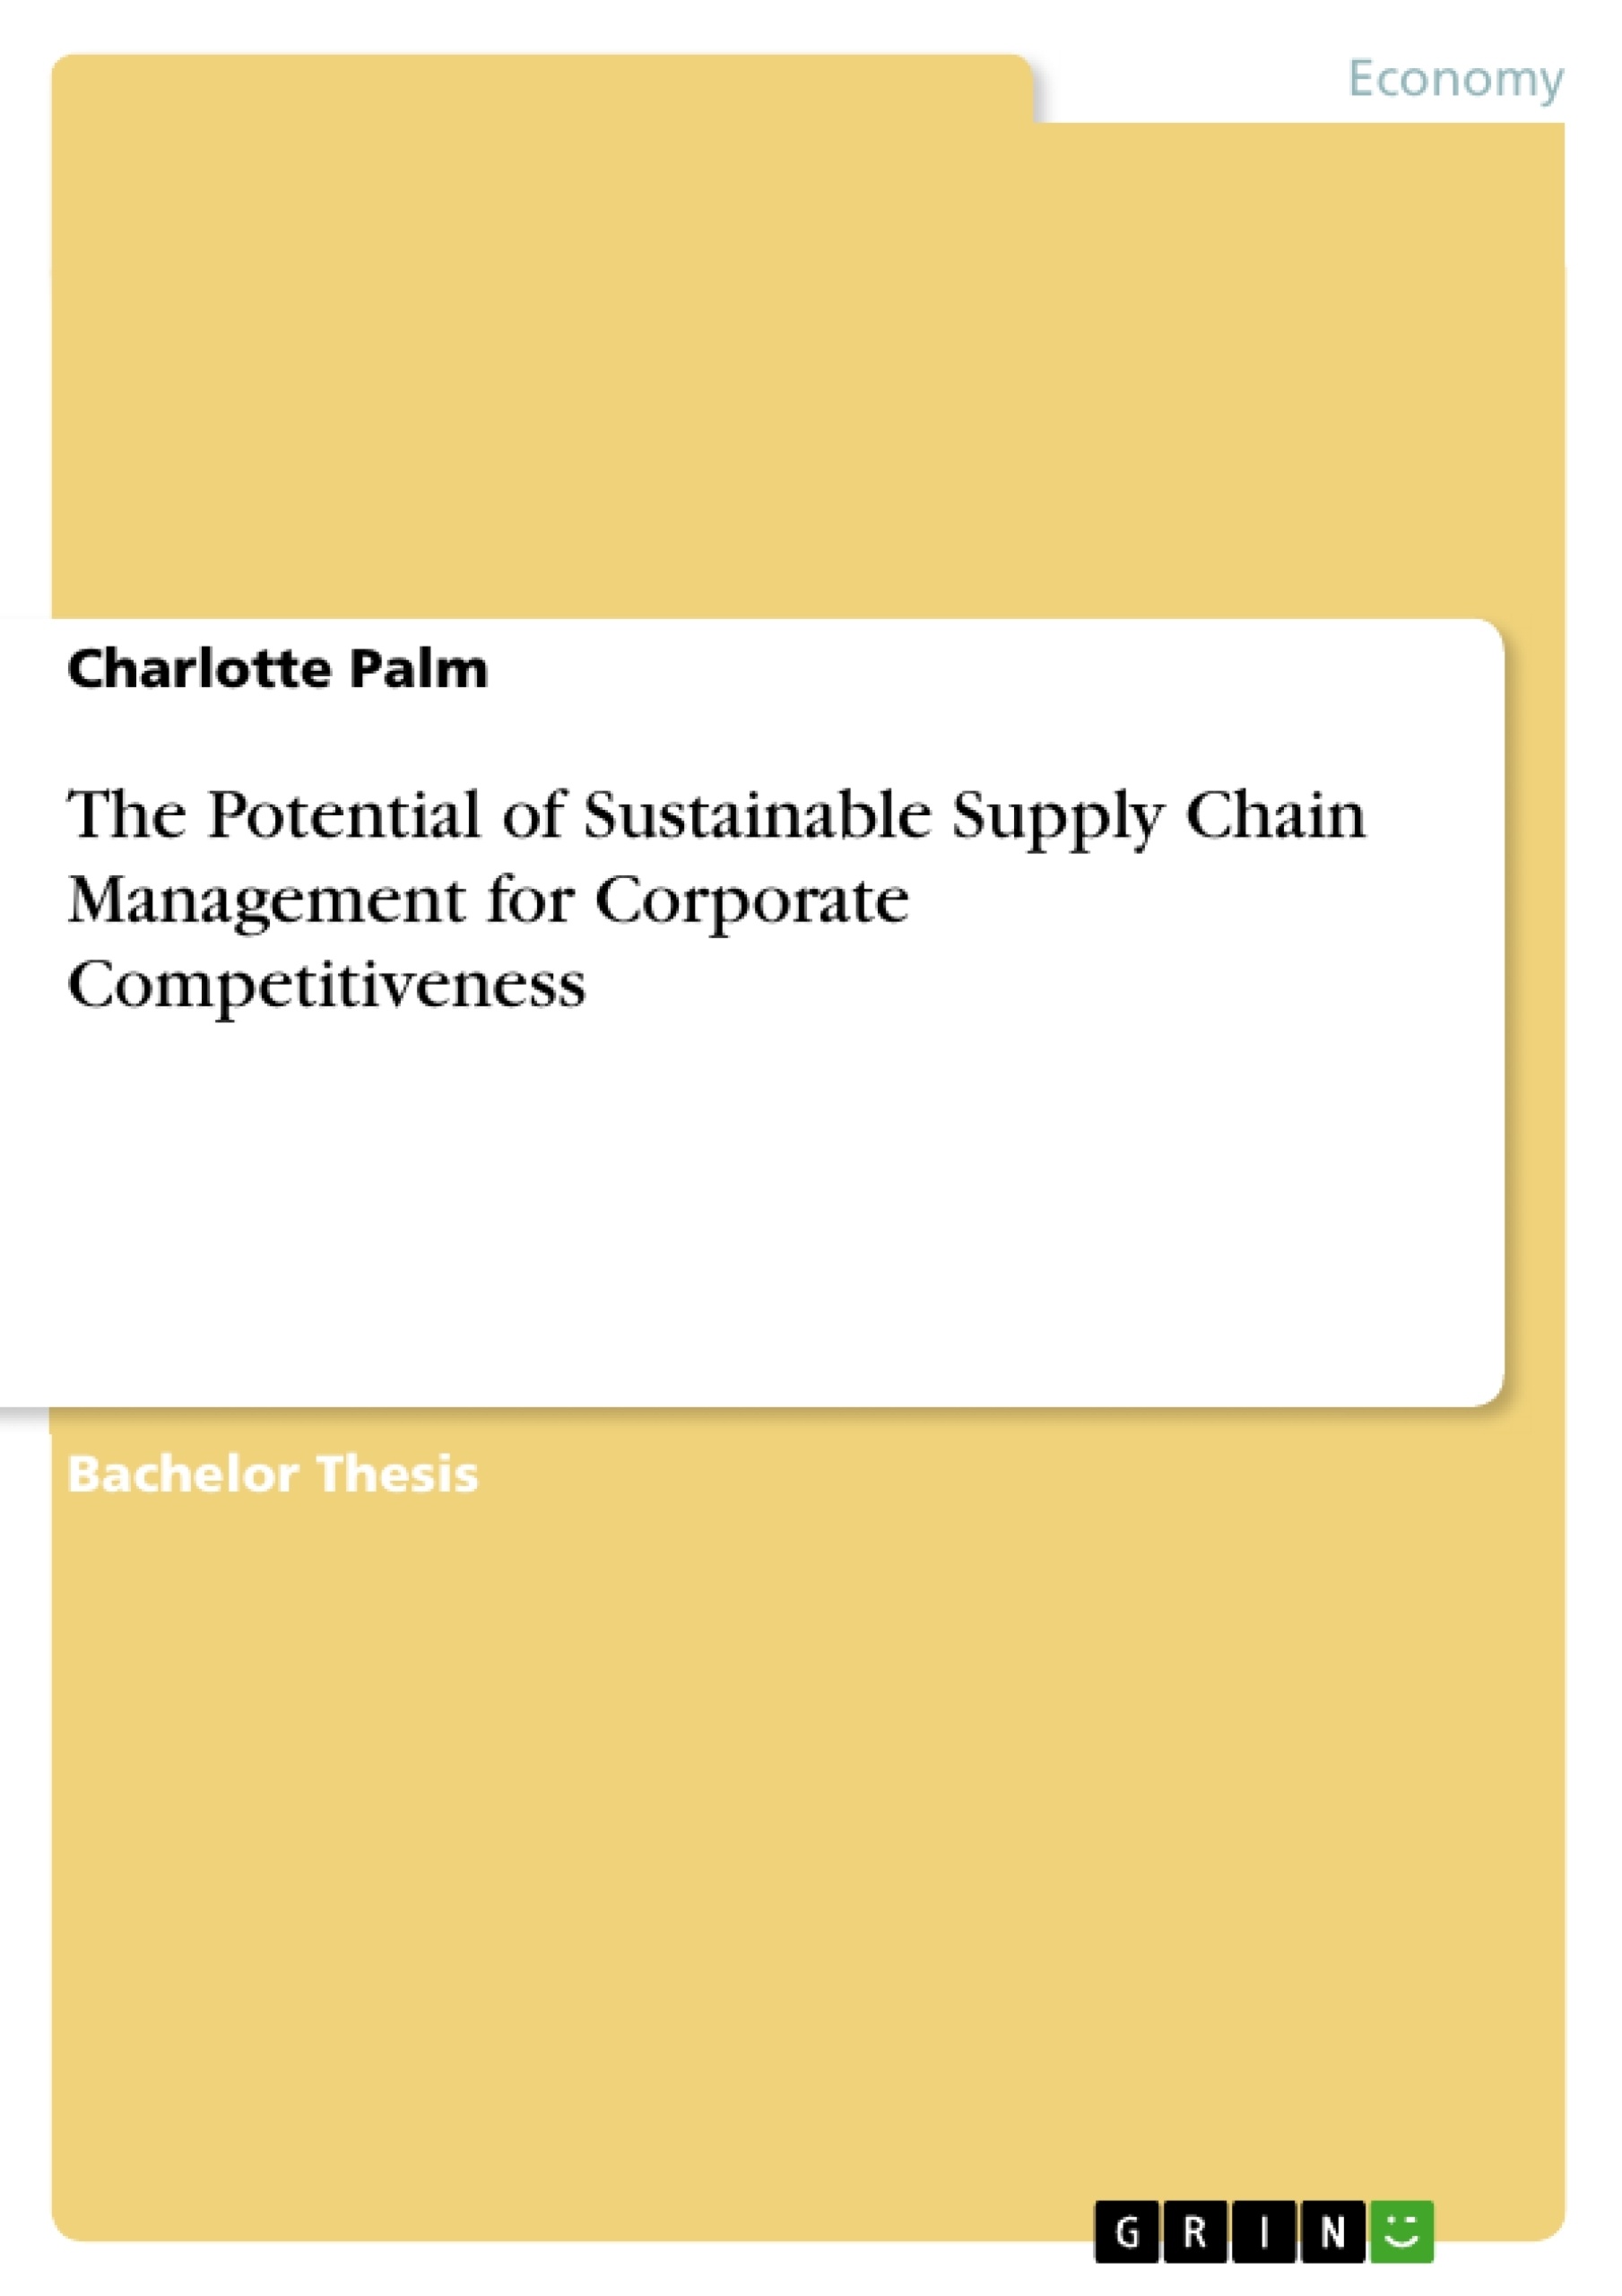 Title: The Potential of Sustainable Supply Chain Management for Corporate Competitiveness